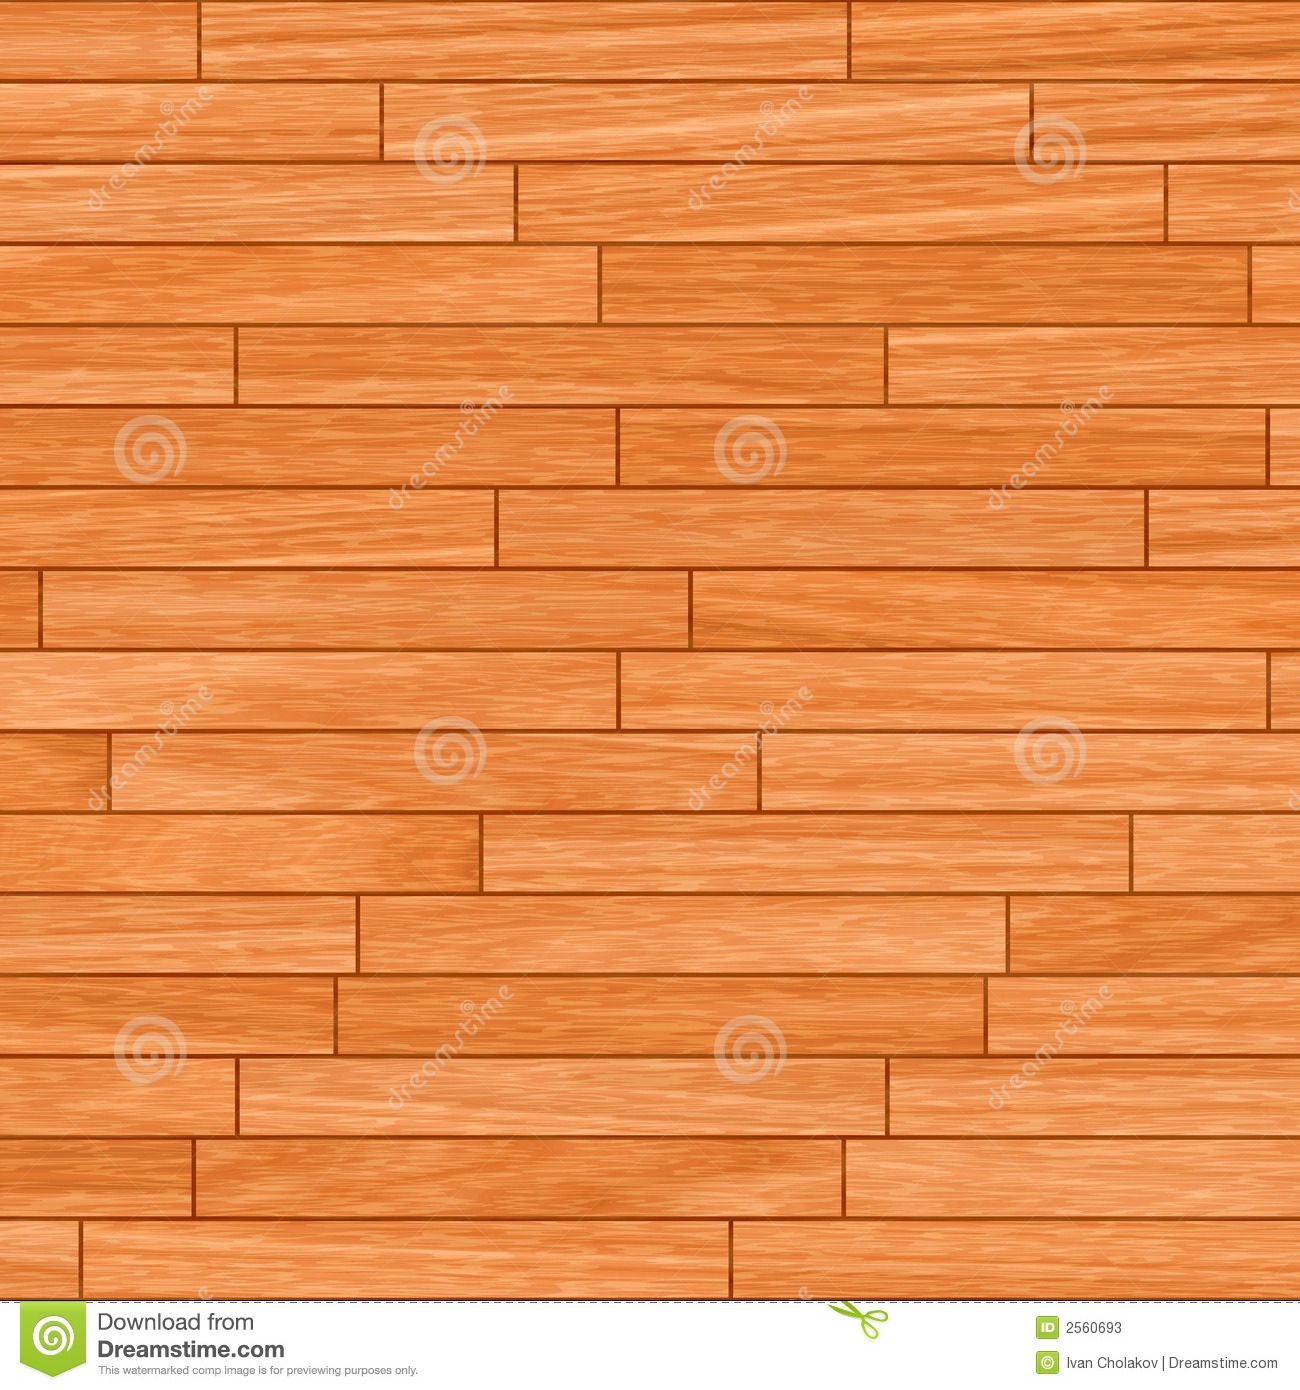 More Similar Stock Images Of   Parquet Wood Floor